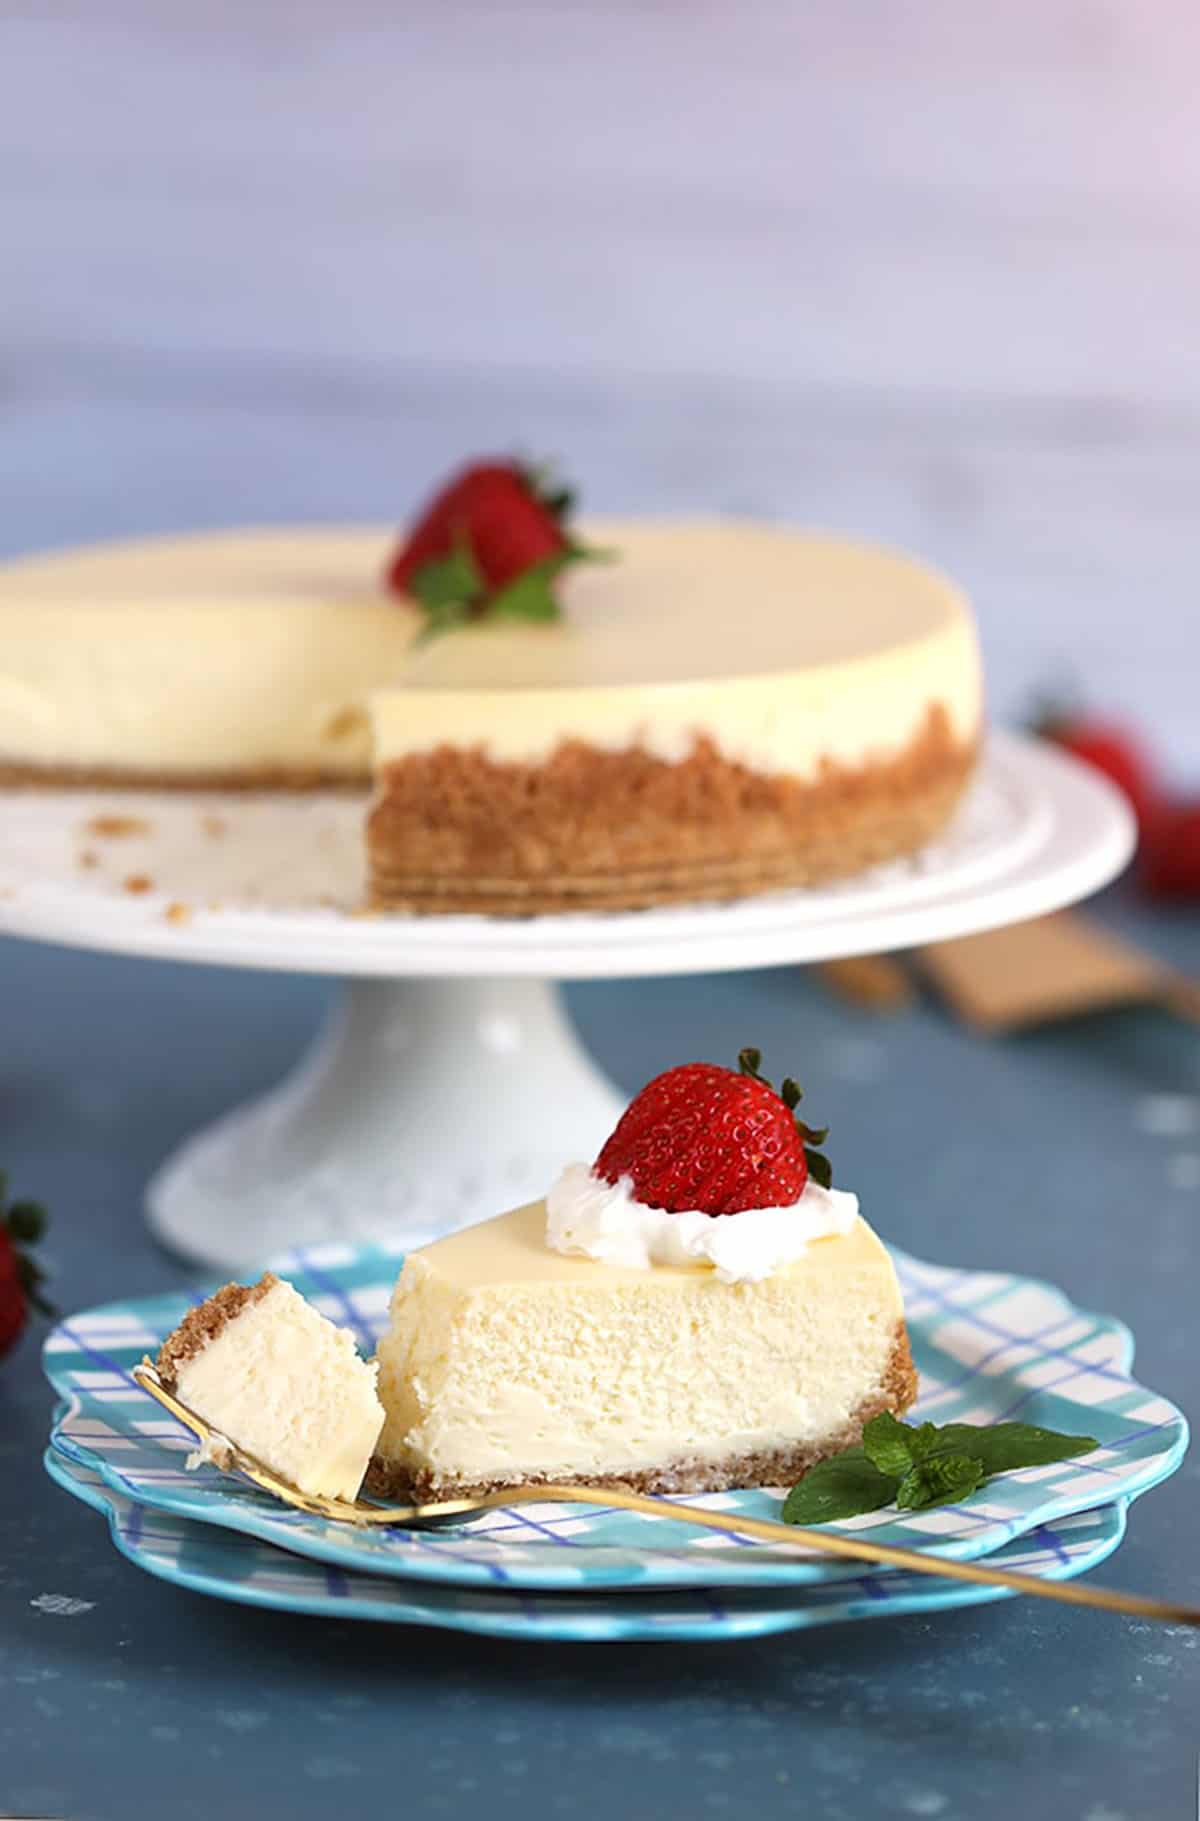 Shot of whole New York Cheesecake with a slice on a plaid plate and a fork with a bite taken.